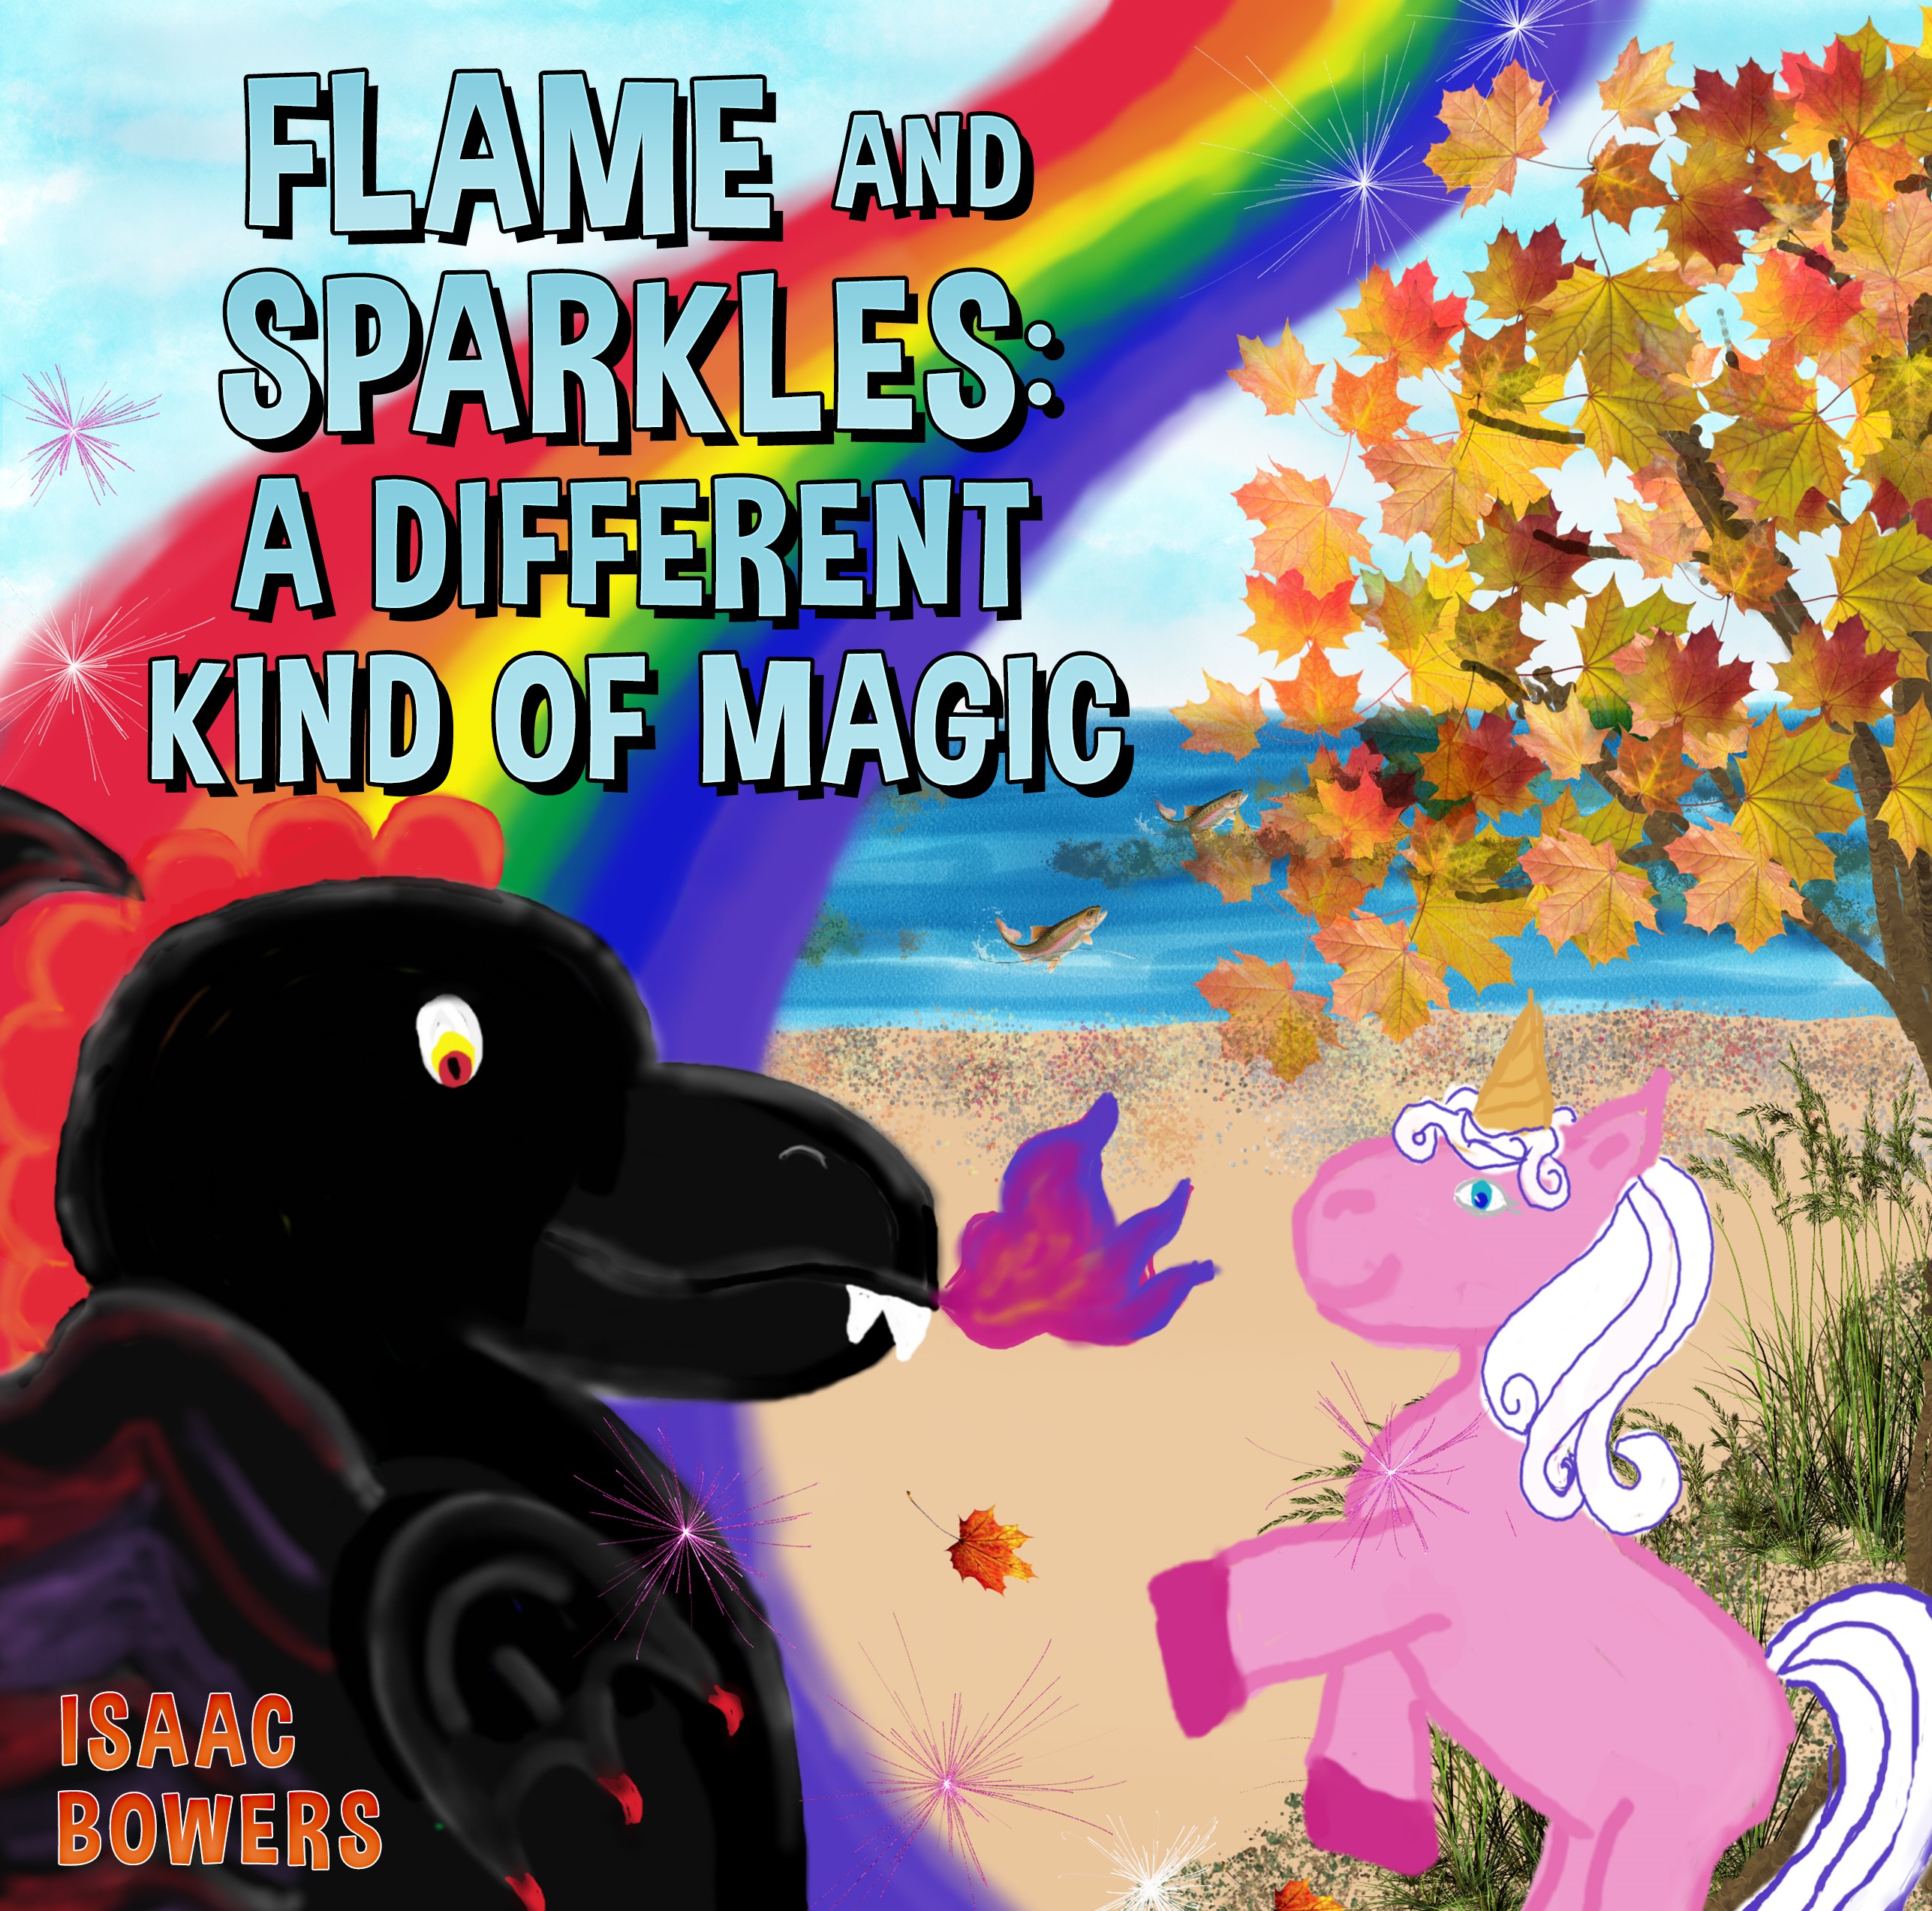 FREE: Flame And Sparkles: A Different Kind of Magic by Isaac Bowers